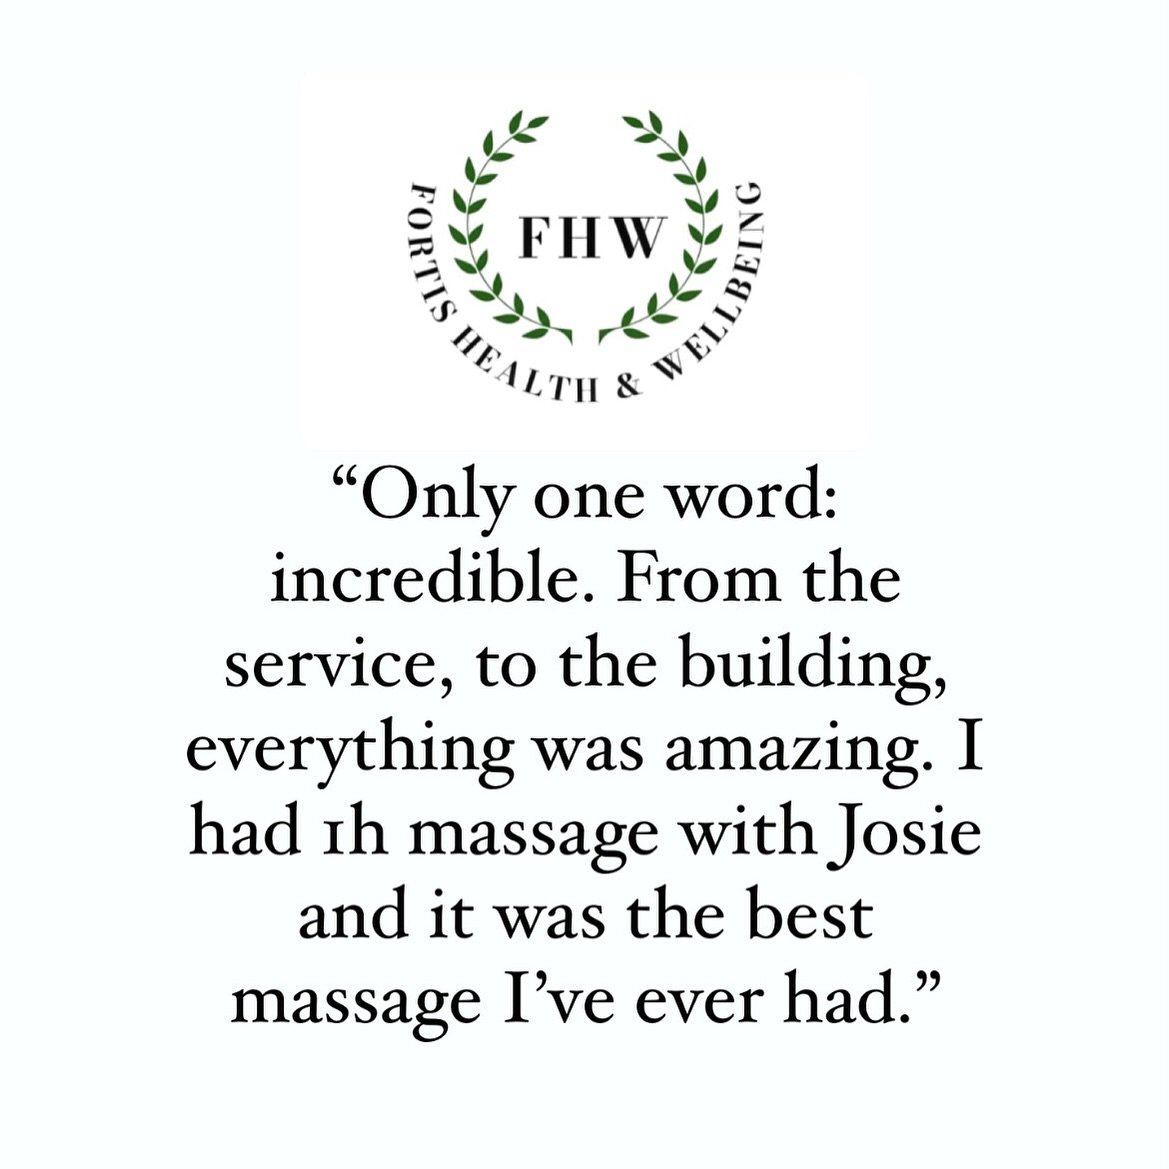 🌿 REVIEW OF THE WEEK 🌿 

We&rsquo;re at the end of another week in our new clinic and are delighted to have received another fantastic review from one of our lovely clients. So glad to hear they enjoyed their treatment and our new space. If you hav